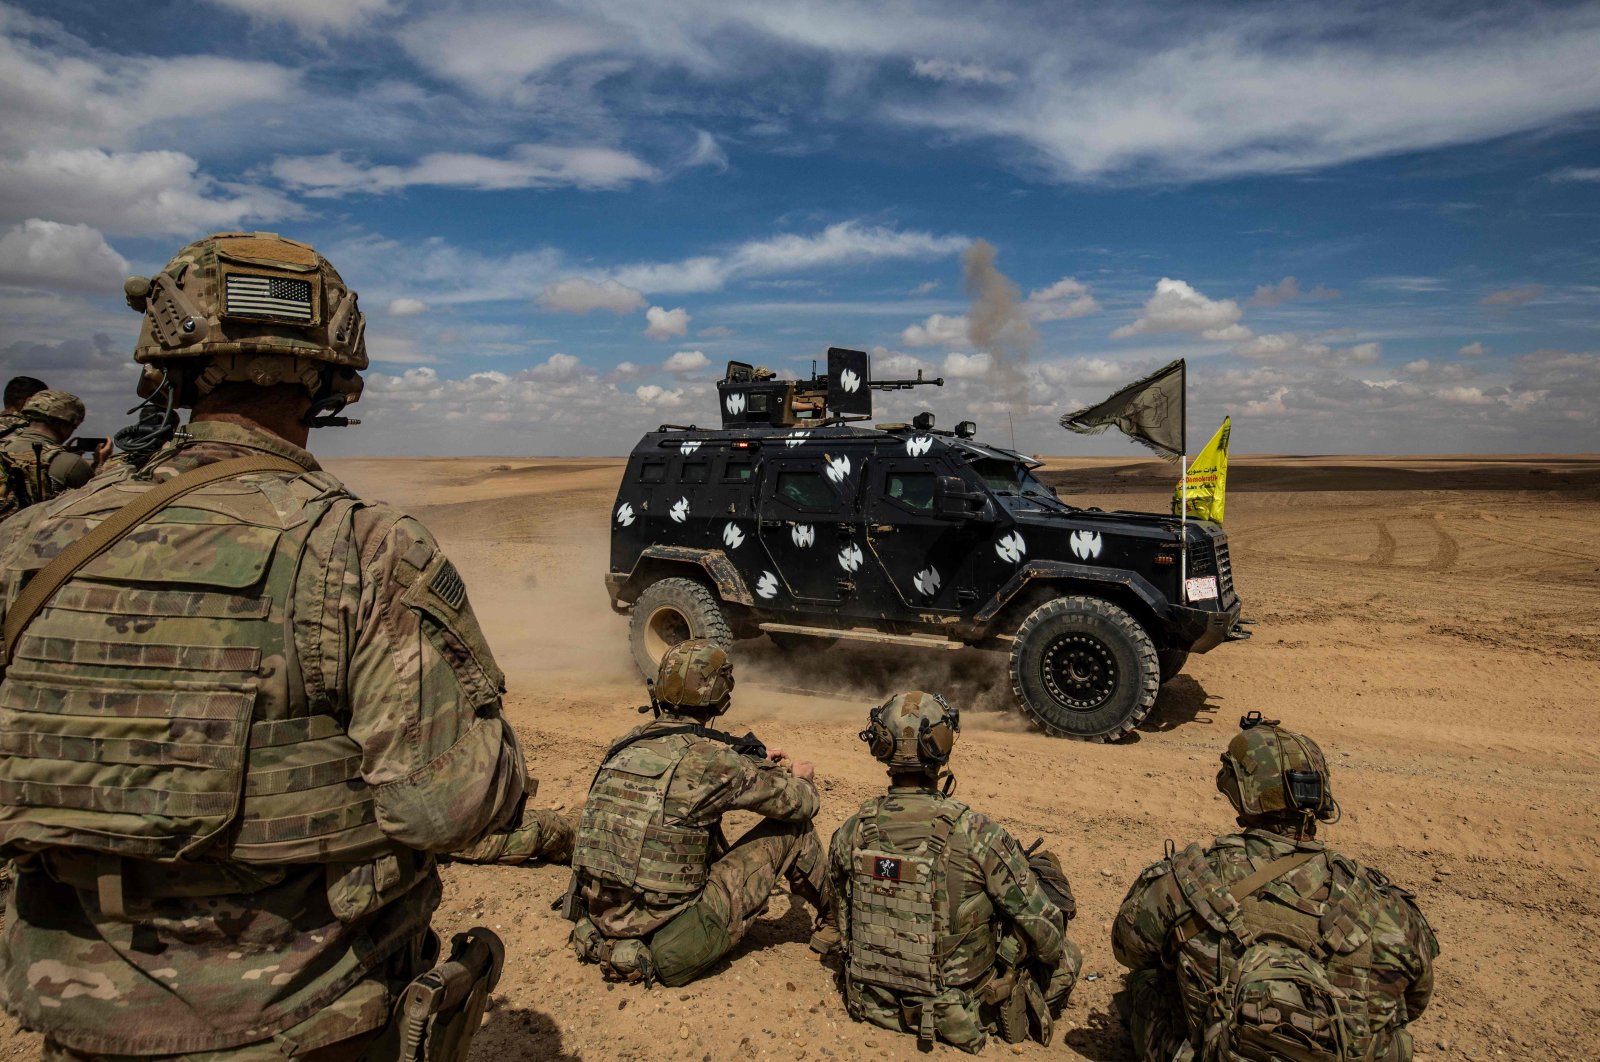 YPG forces and the U.S.-led coalition troops jointly take part in heavy-weaponry military exercises in the countryside of Deir el-Zour, northeastern Syria, March 25, 2022. (AFP)